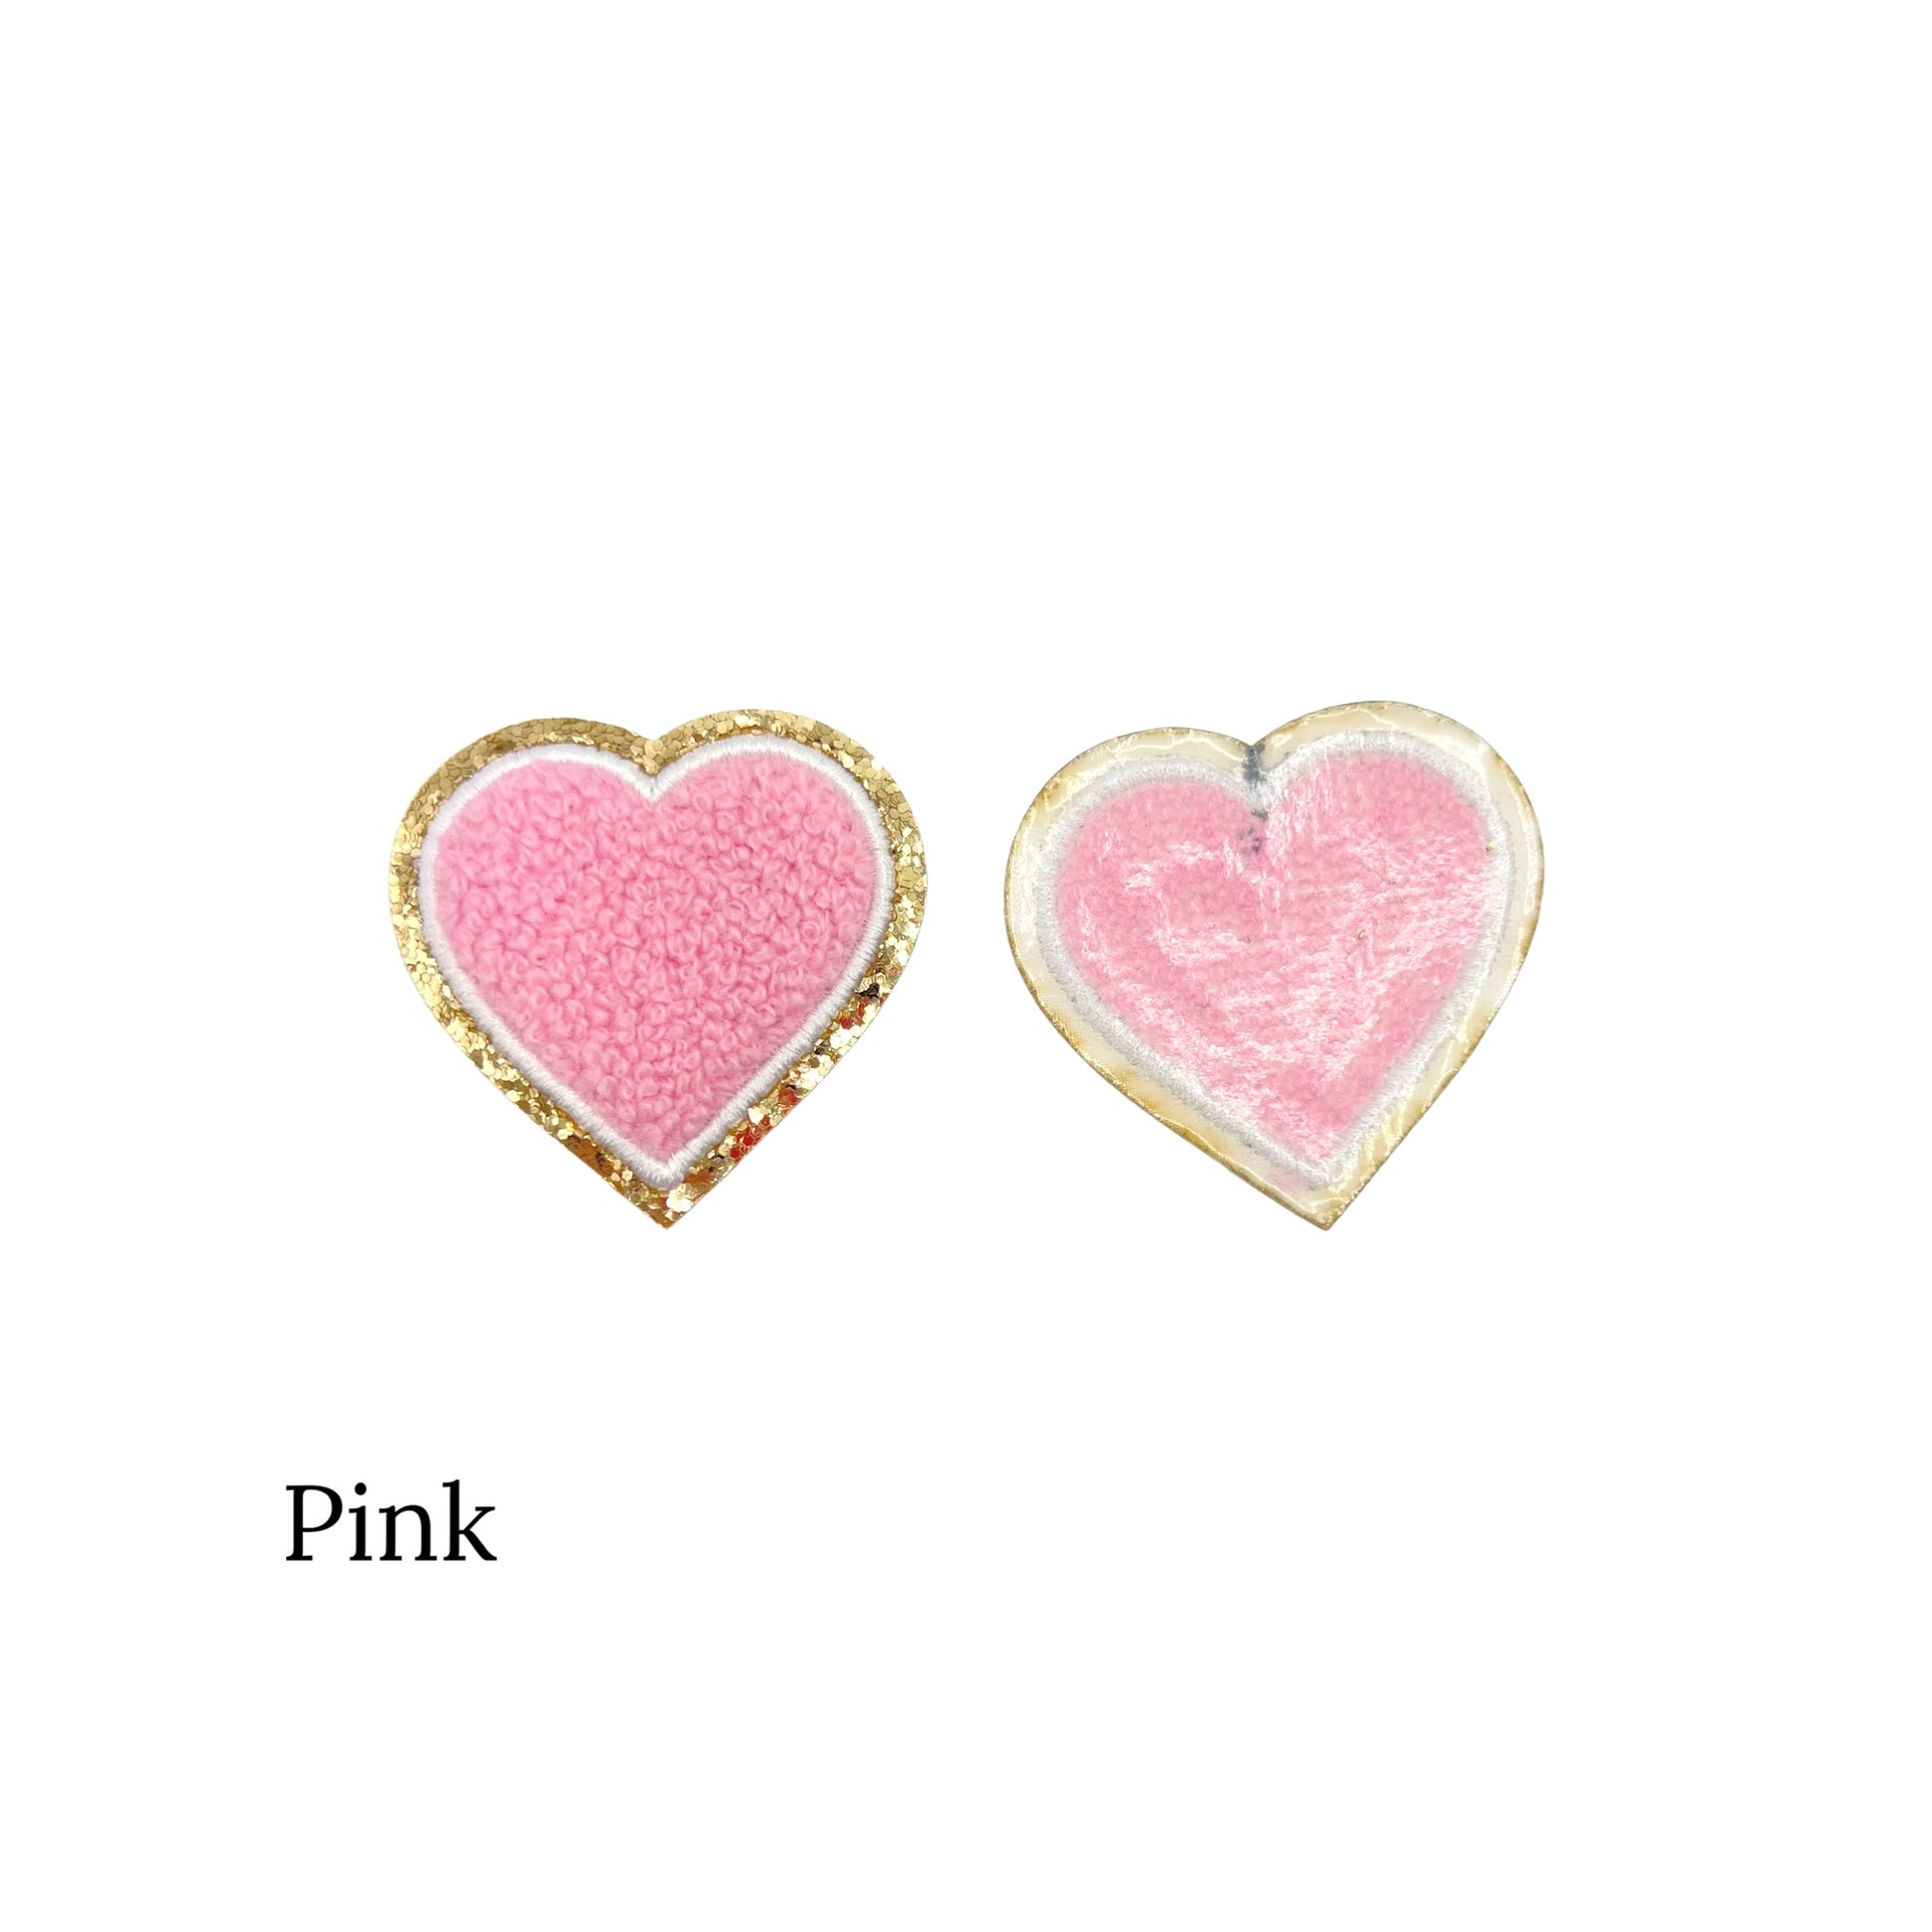 Hearts Chenille Iron On Patch – Pip Supply